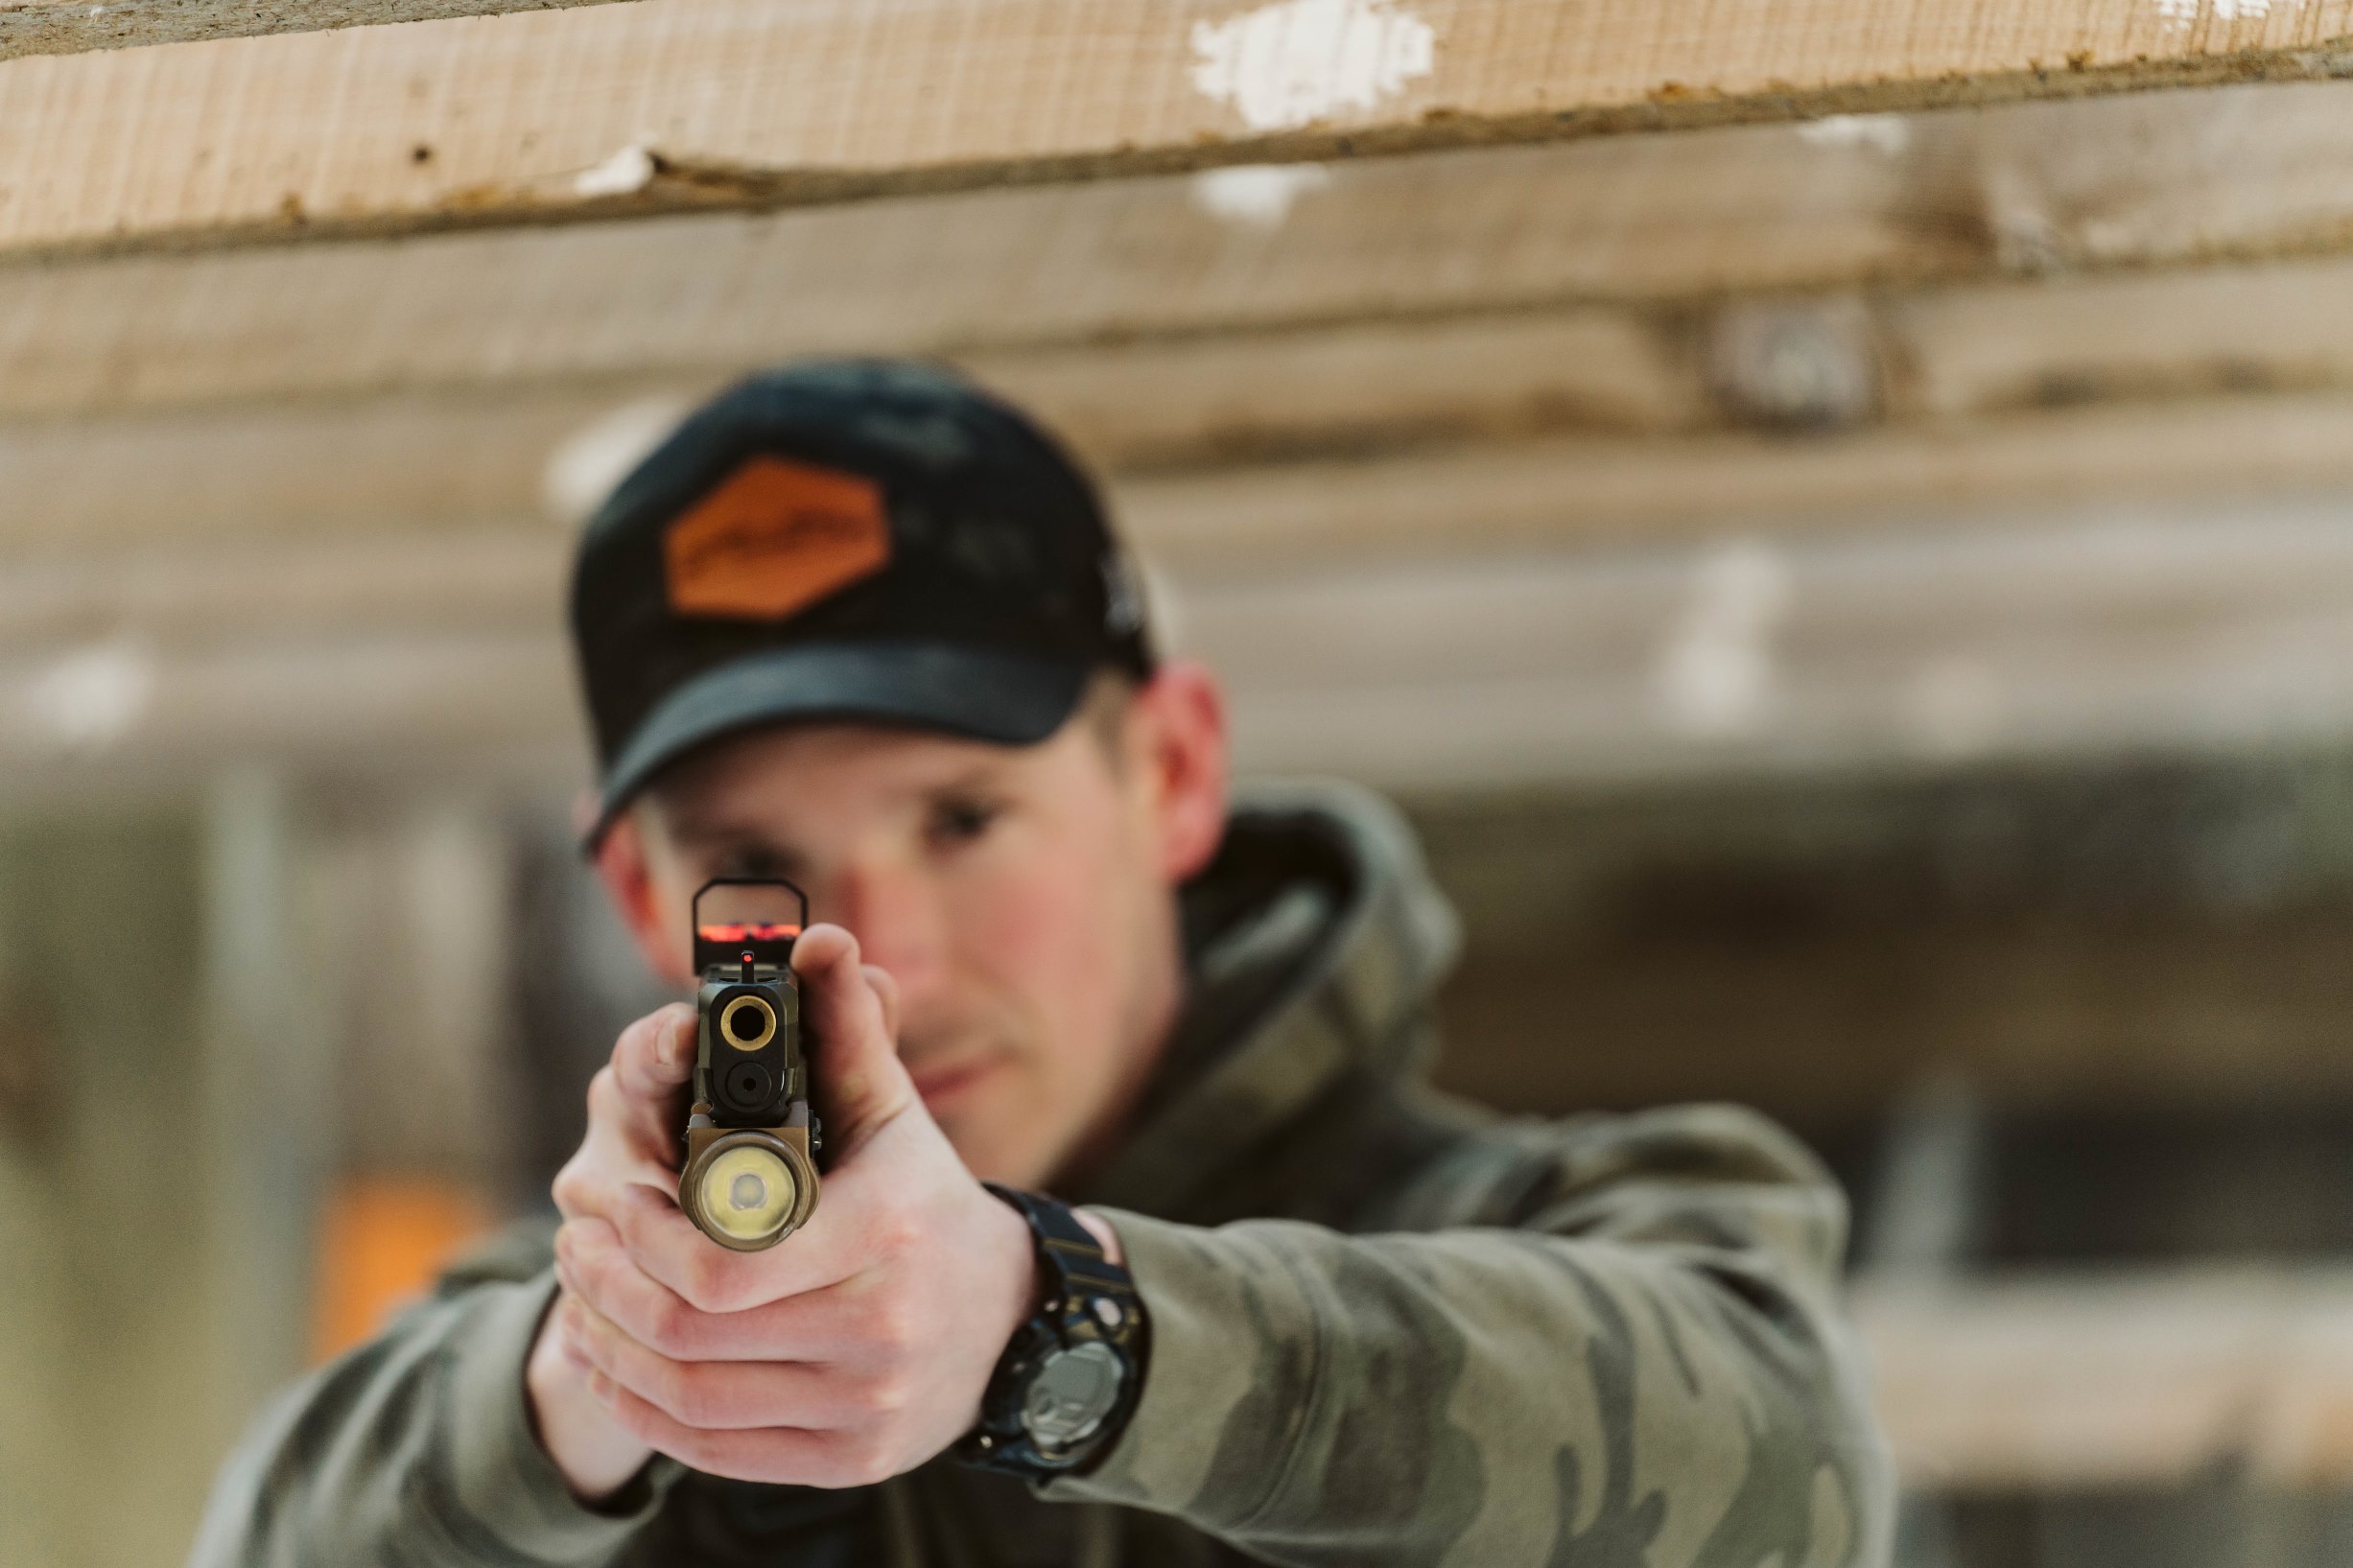 Blog # 245 - Why You Should Conceal Carry